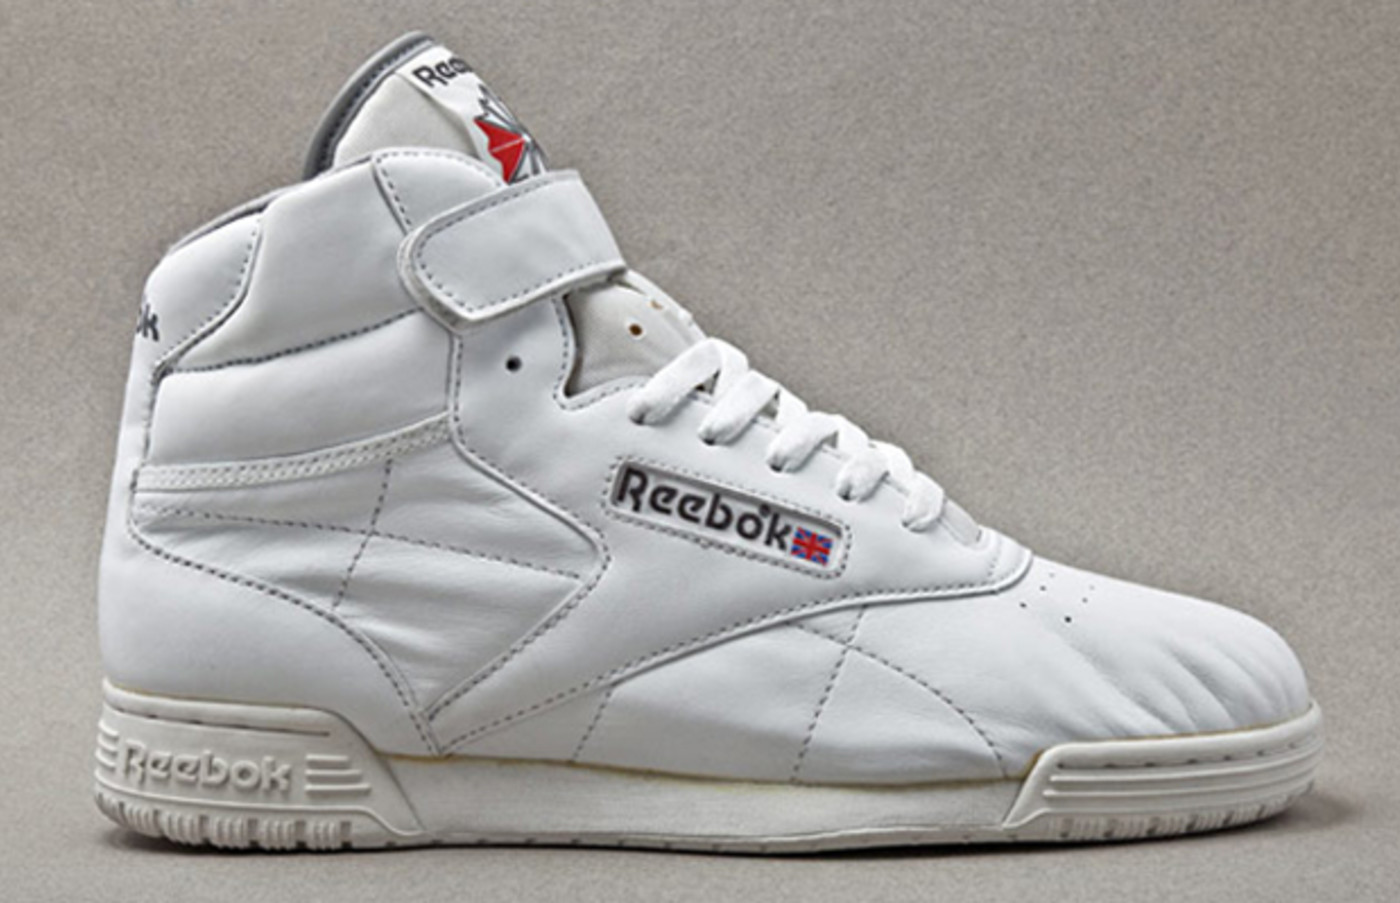 reebok shoes from the 80's